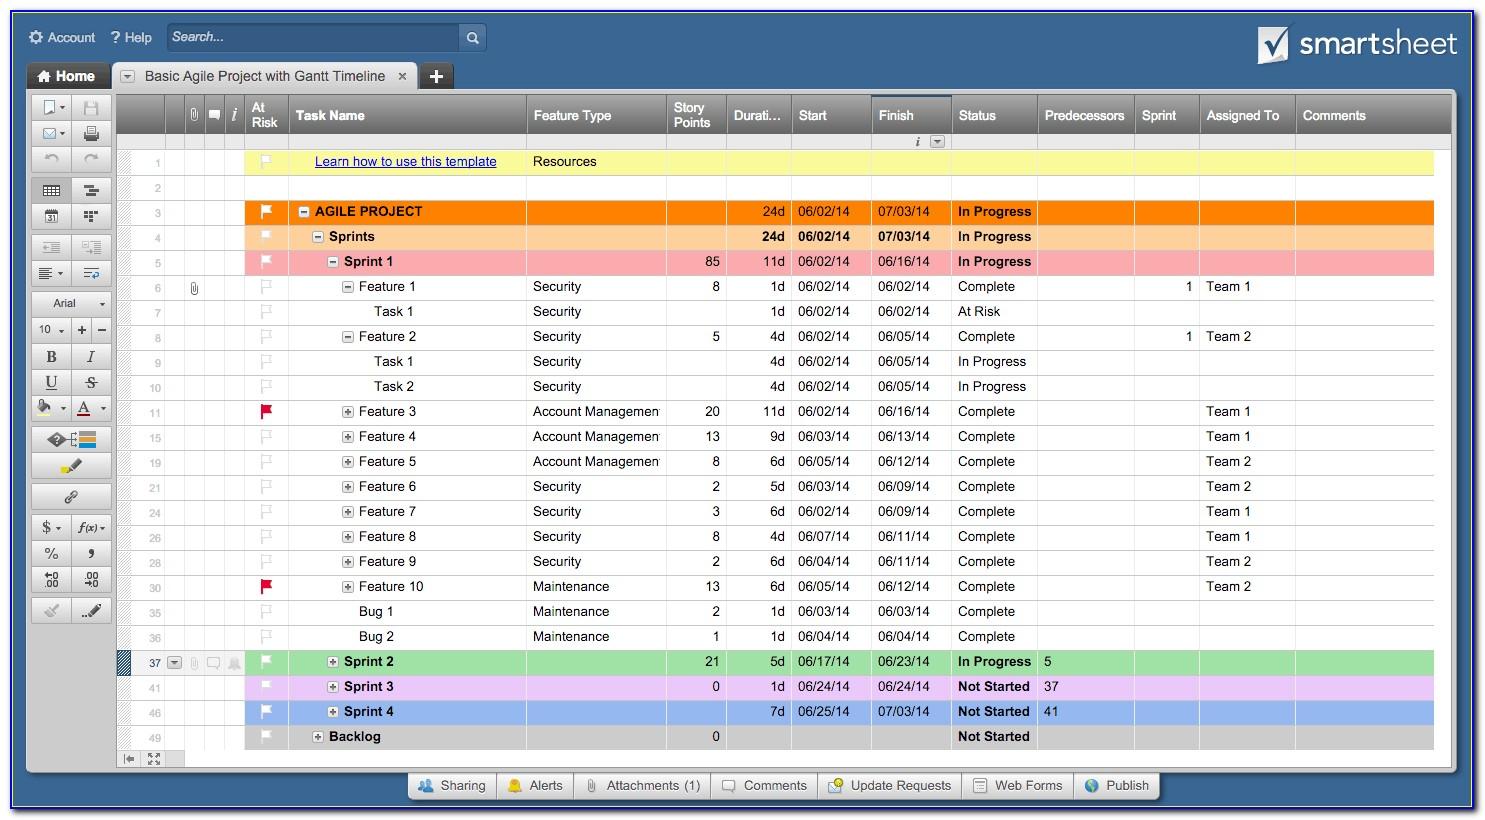 microsoft-excel-project-management-tracking-templates